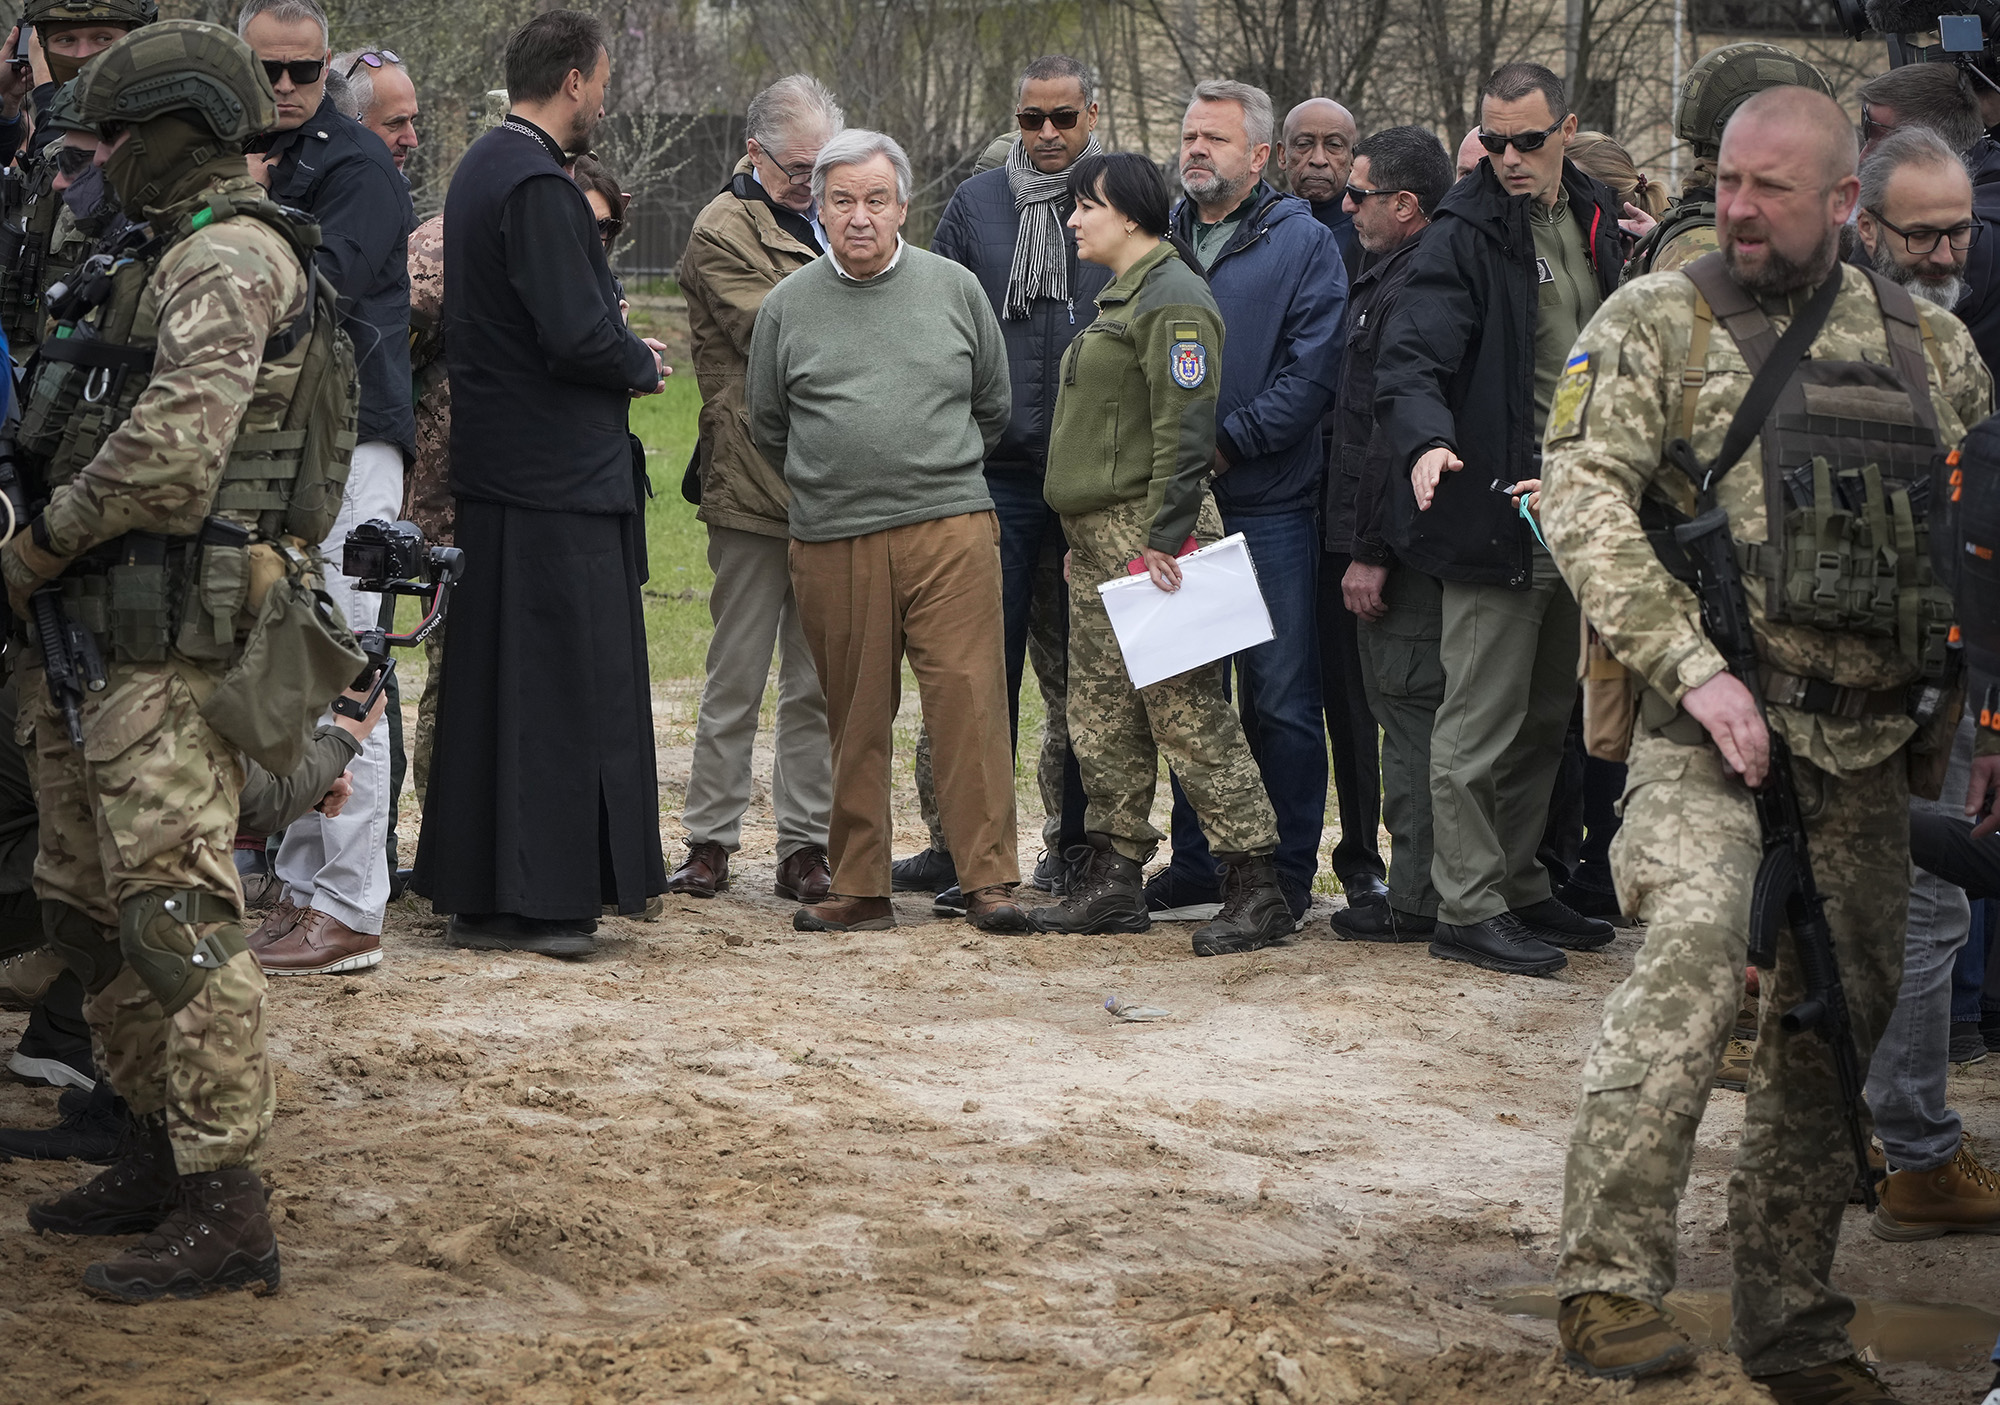 U.N. Secretary-General Antonio Guterres stands near the side of a mass grave in Bucha, on the outskirts of Kyiv, Ukraine on Thursday April 28.